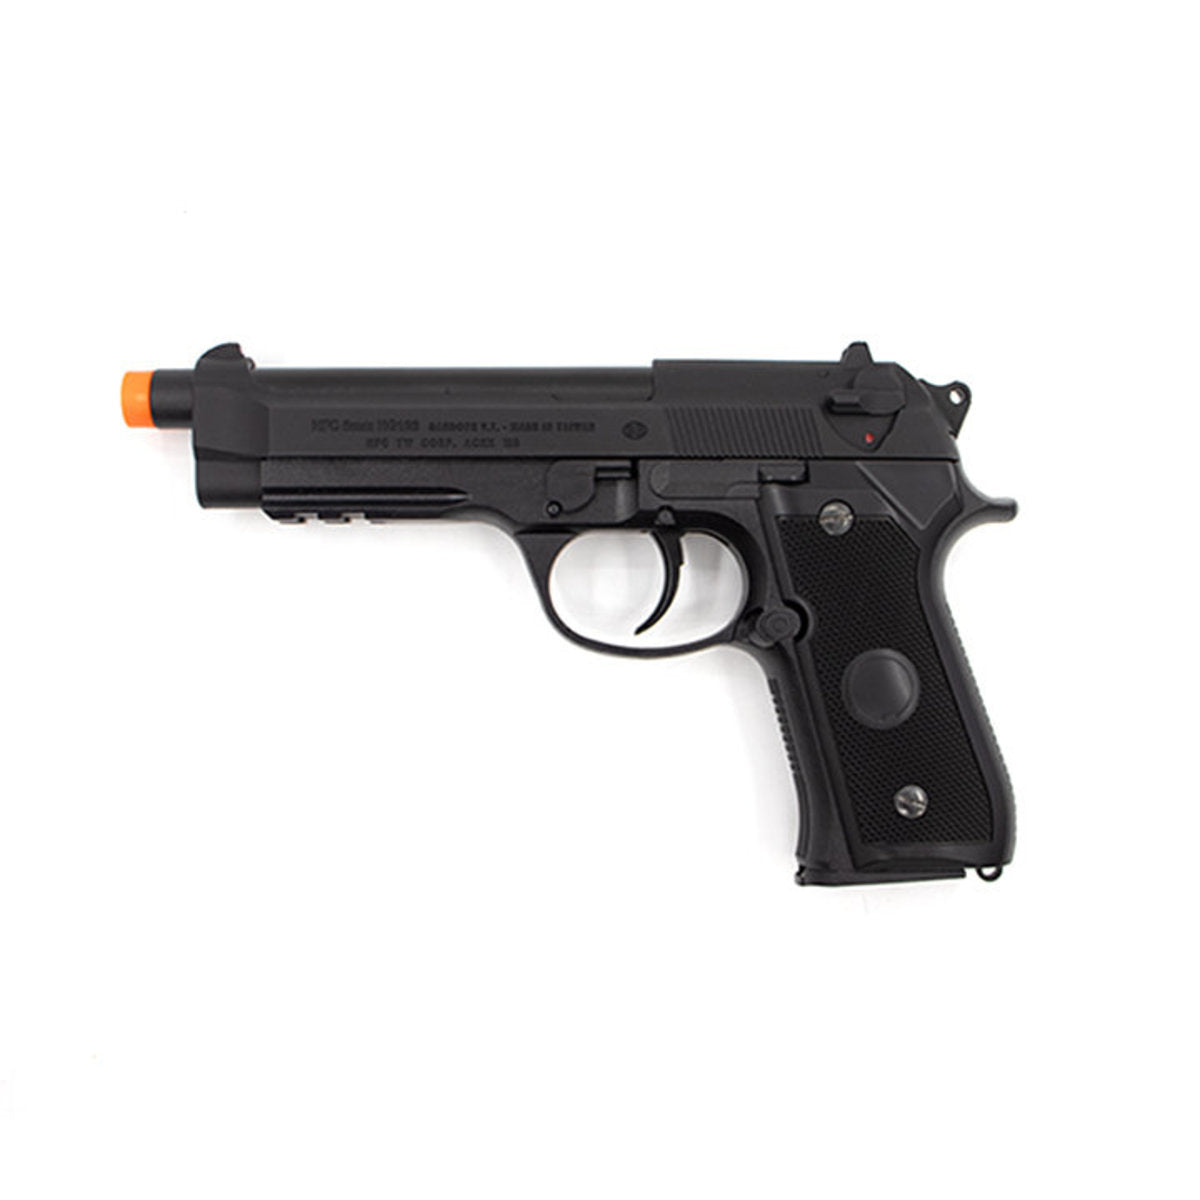 Valken Infinity M92 Green Gas Non-Blowback Airsoft Pistol - Eminent Paintball And Airsoft